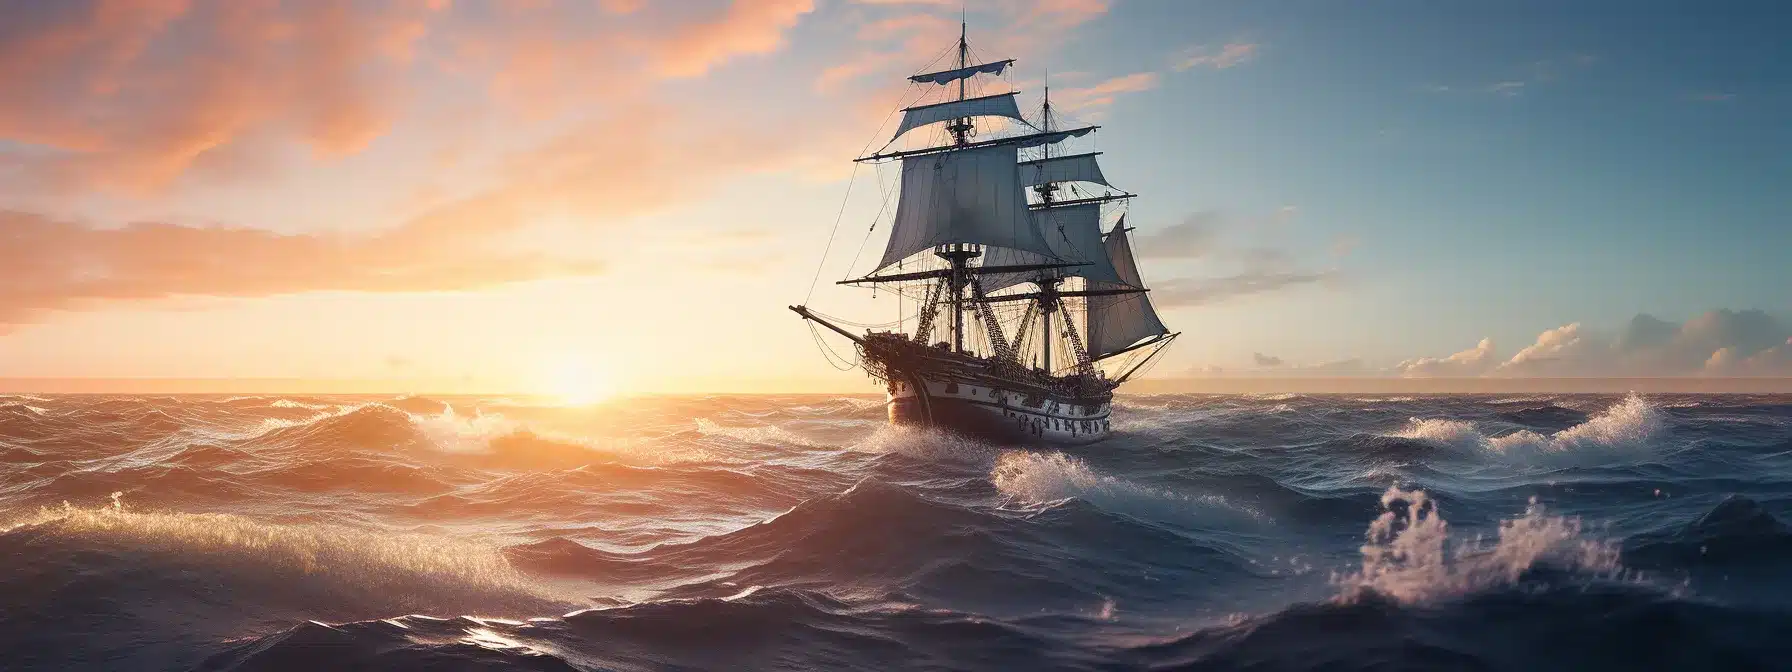 A Ship Sailing Through A Vast Ocean Of Digital Media, Guided By Marketing Skills And A Content Strategy Map.